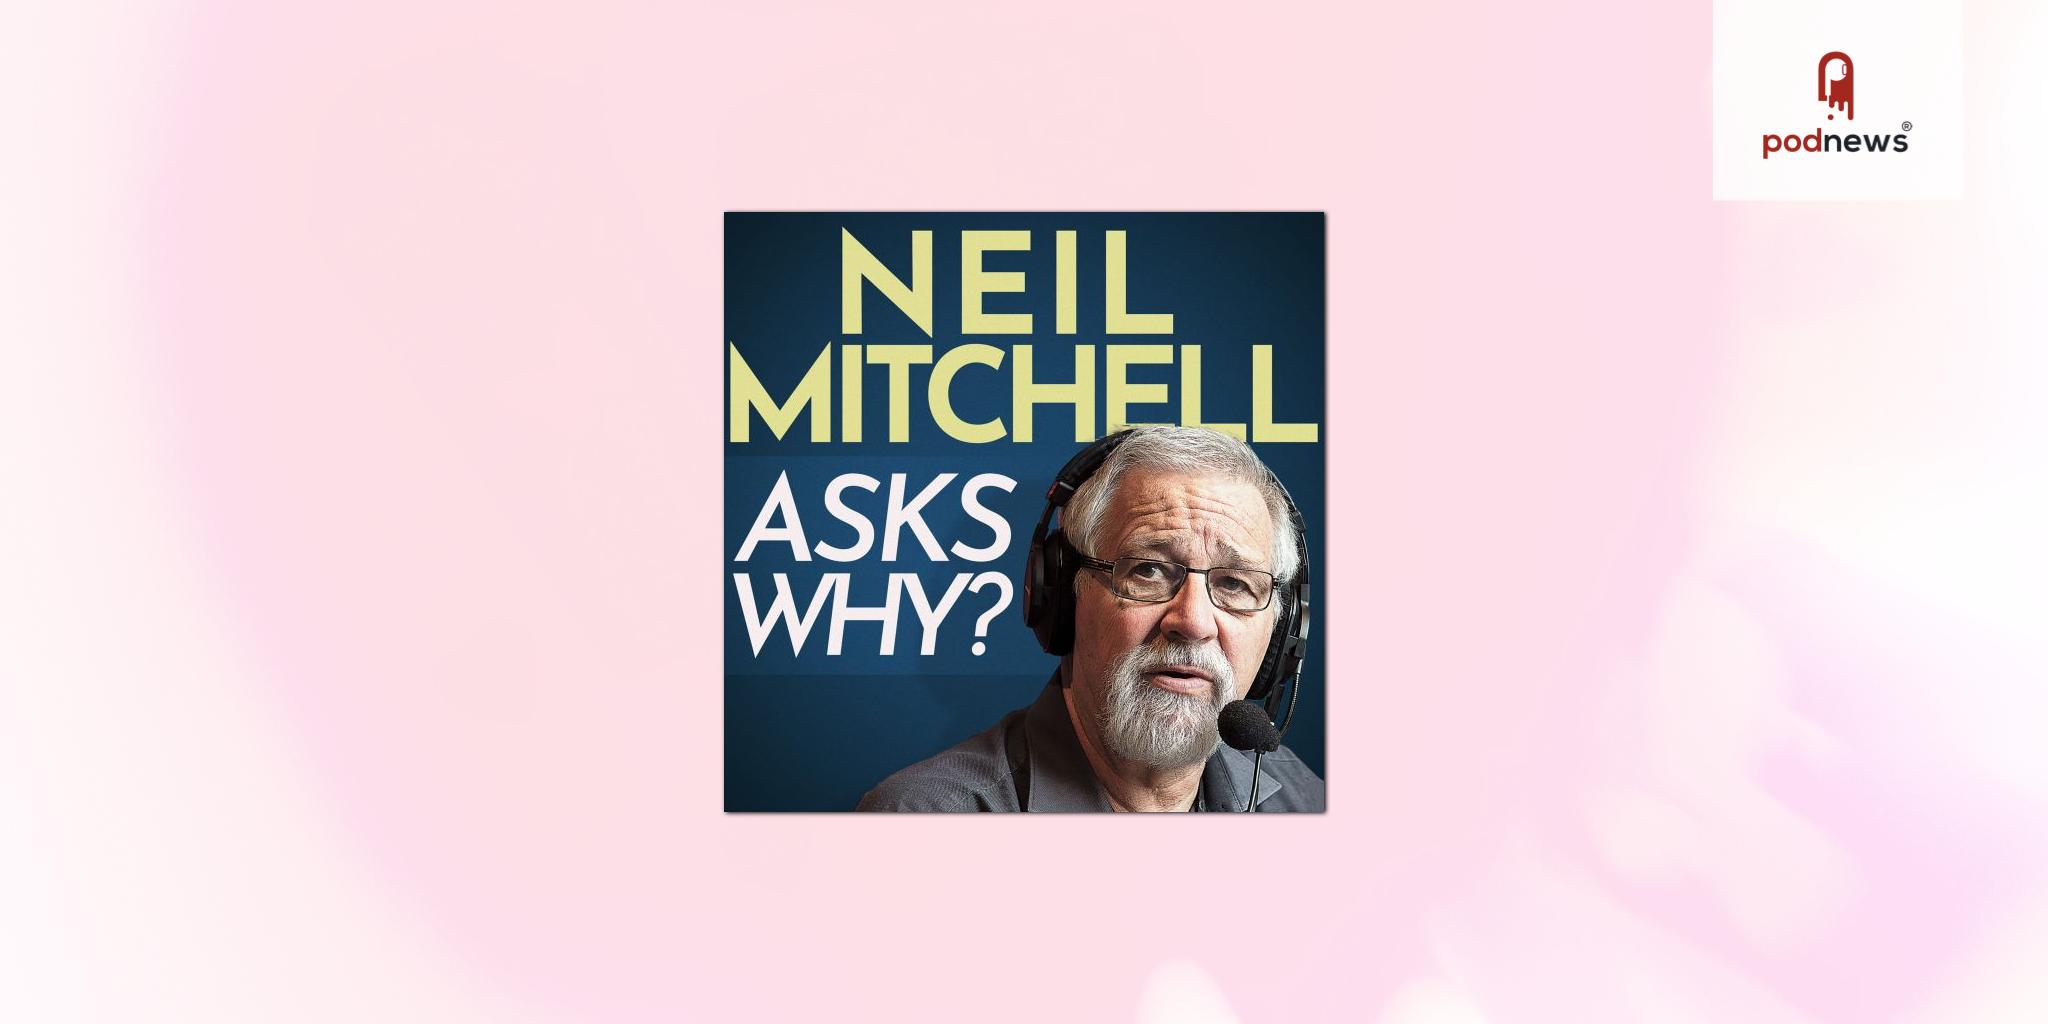 Respected broadcaster Neil Mitchell 'Asks Why?' in new podcast series